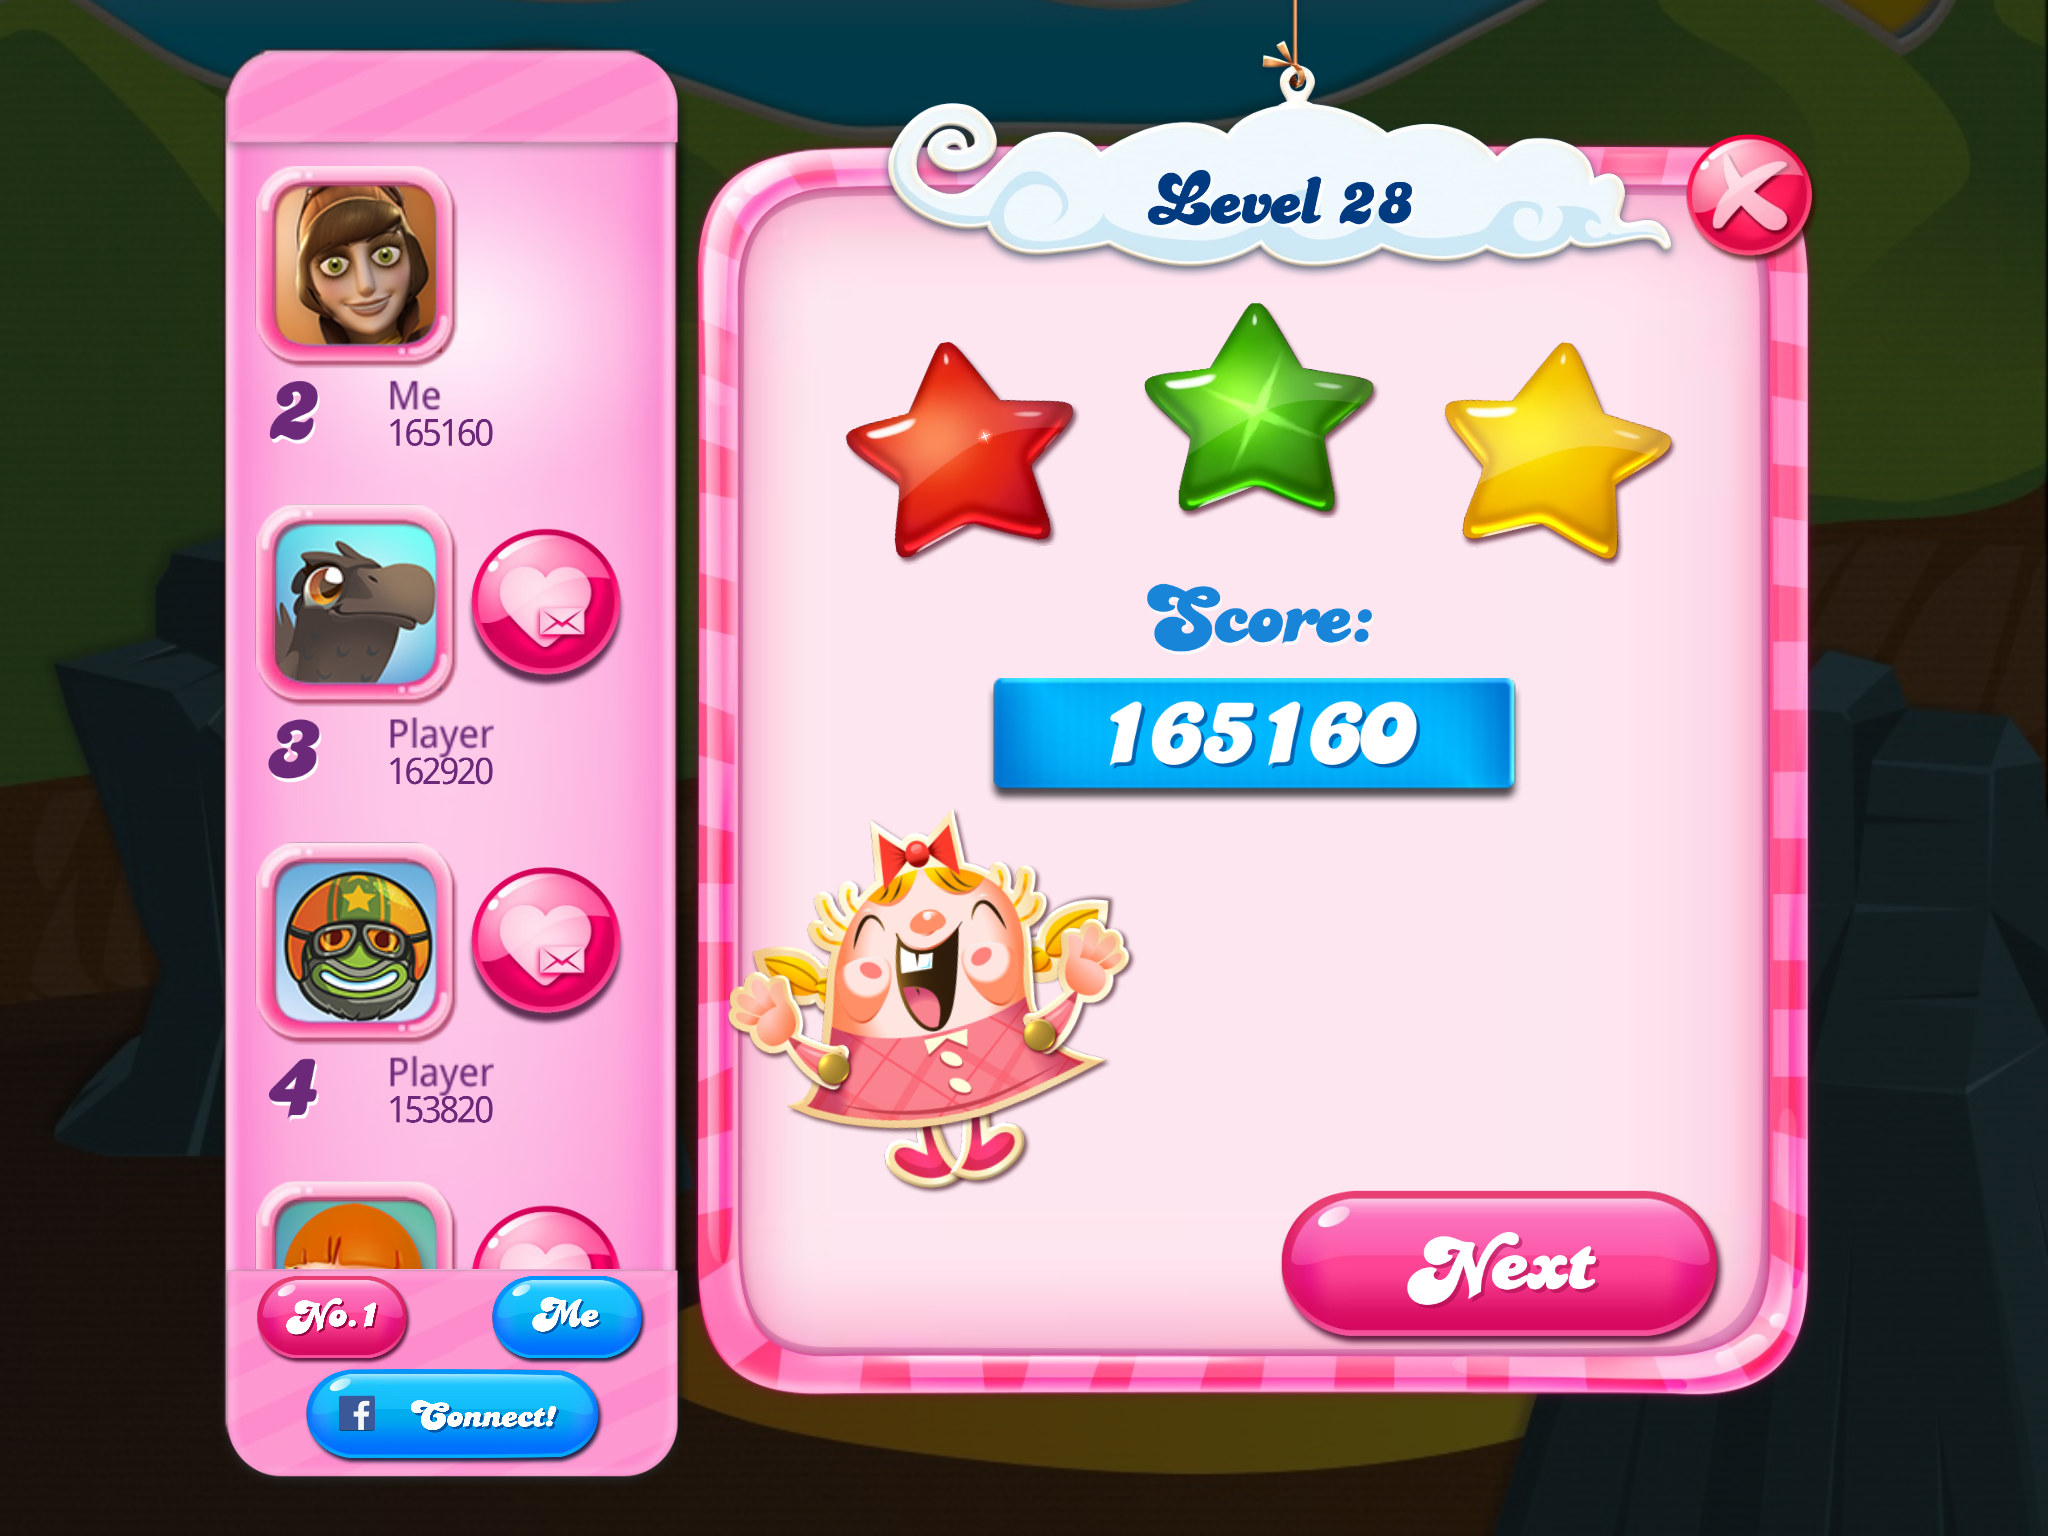 Spindy12: Candy Crush Saga: Level 028 (iOS) 165,160 points on 2016-12-21 17:32:31